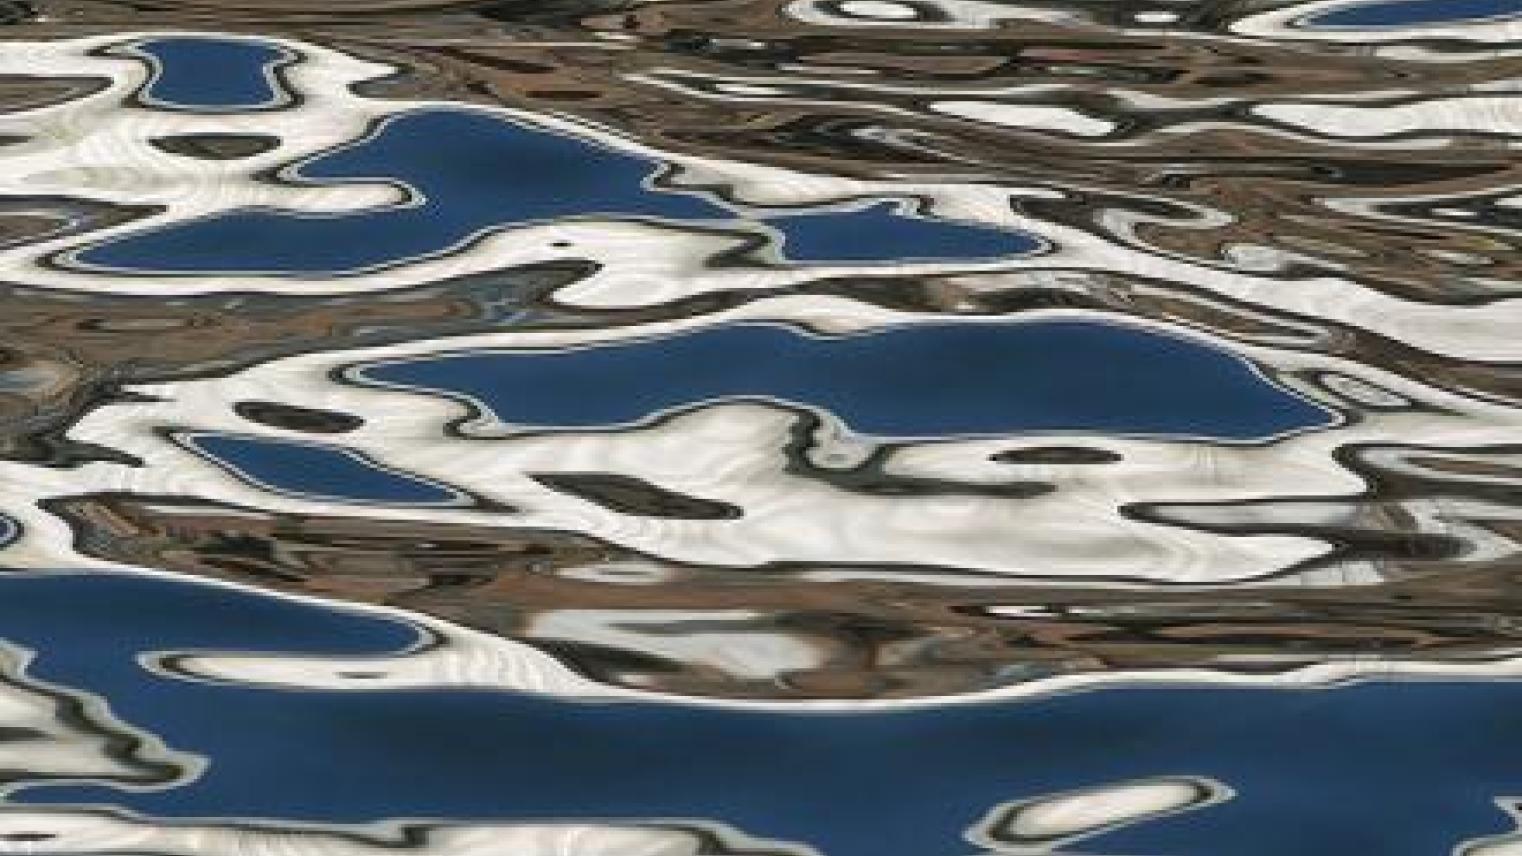 Image: Water Abstract by Dana (Flickr)